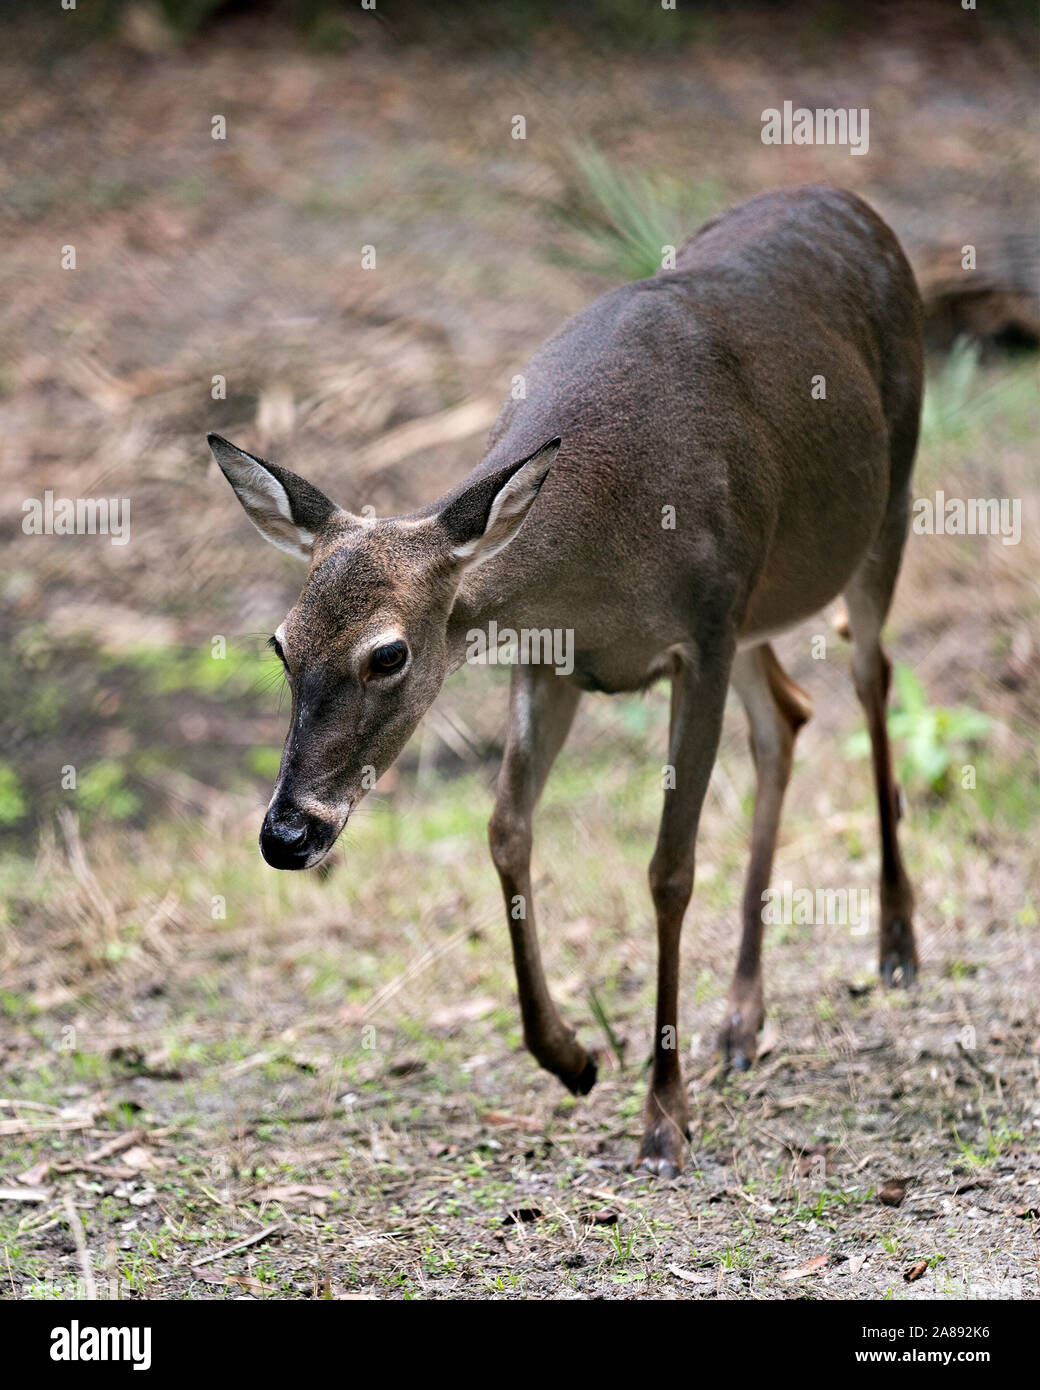 Deer (White Tailed Deer) close-up view walking in the field exposing its body, head, ears, eyes, nose, legs, in its environment and surrounding. Stock Photo